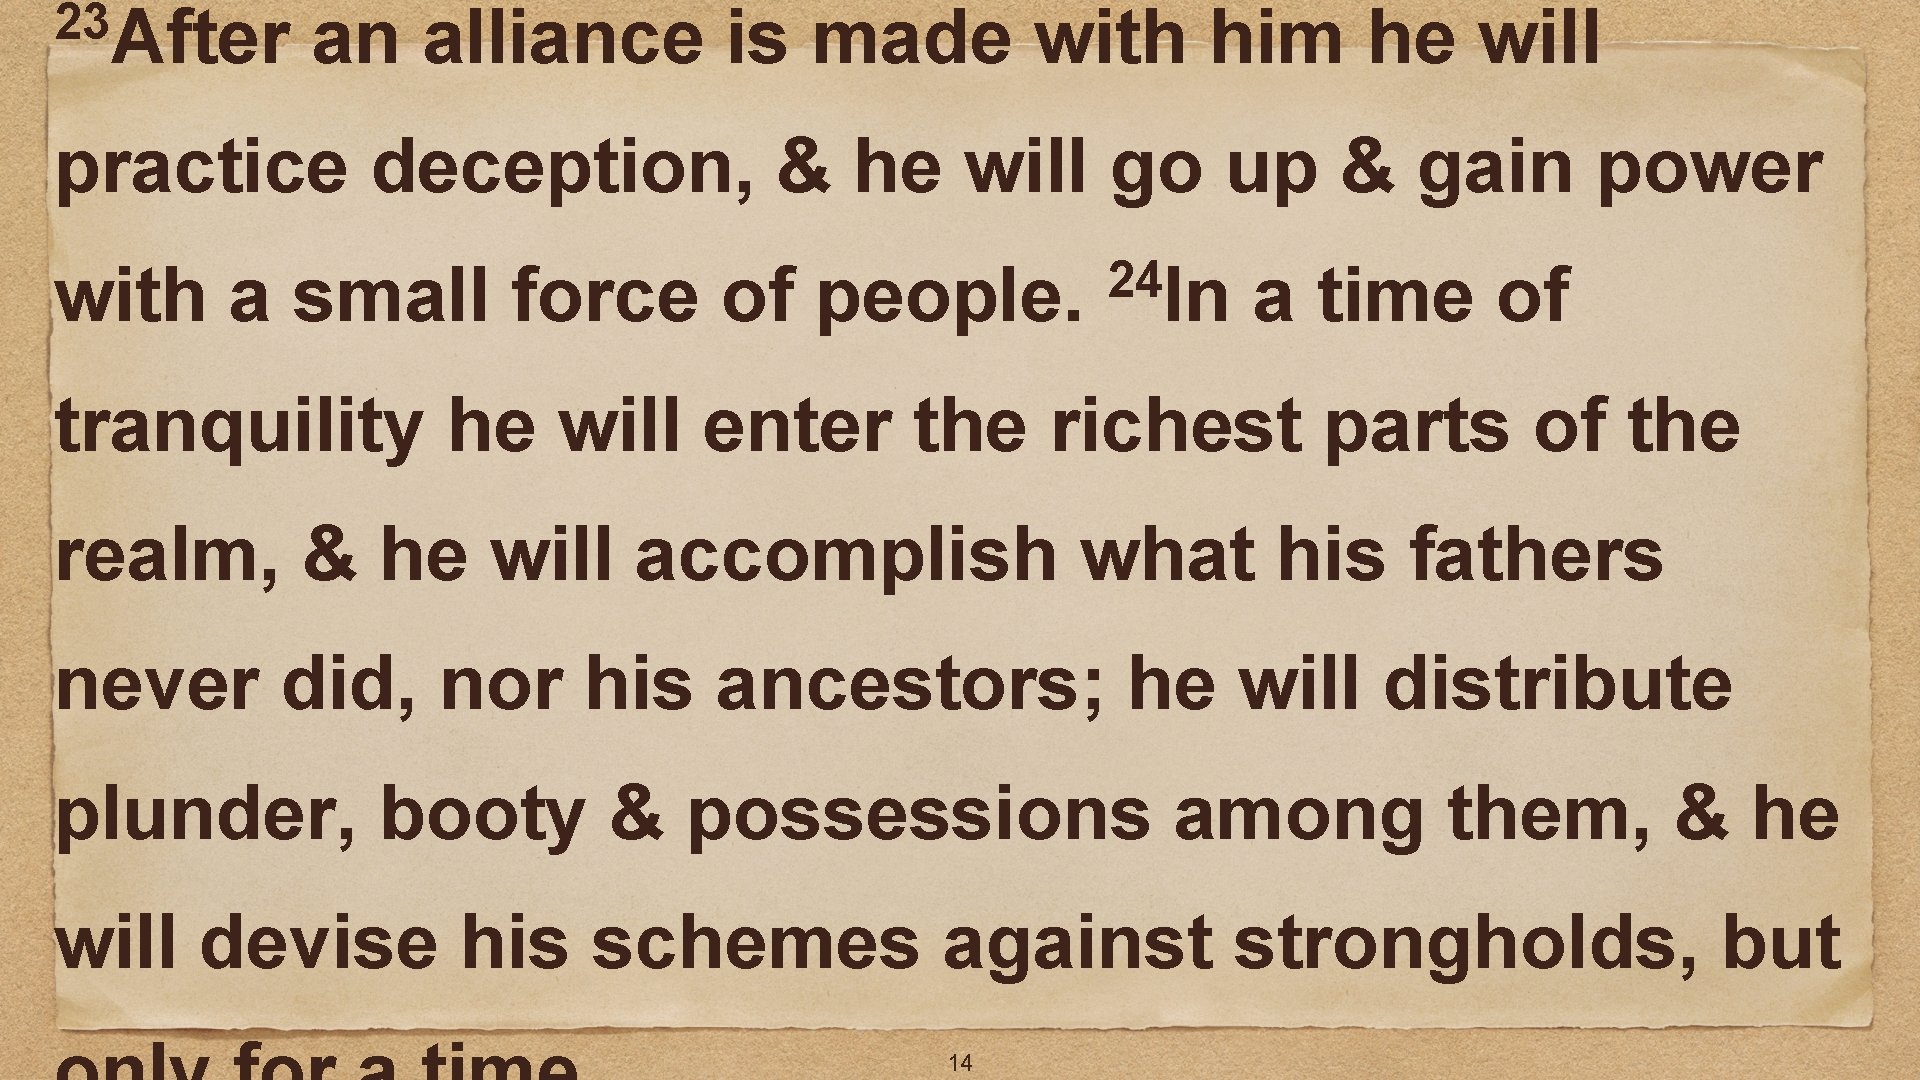 23 After an alliance is made with him he will practice deception, & he